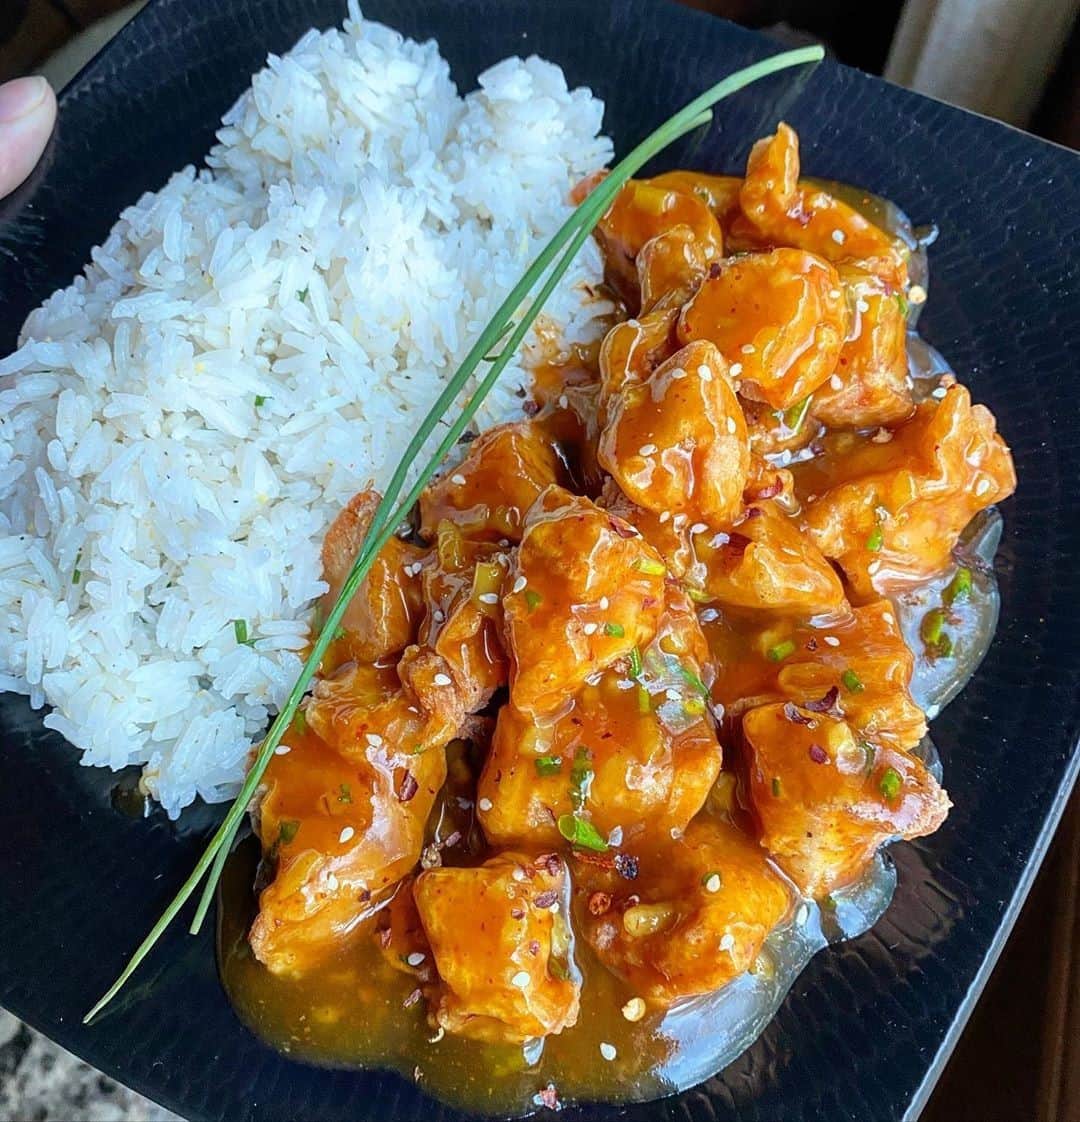 Flavorgod Seasoningsさんのインスタグラム写真 - (Flavorgod SeasoningsInstagram)「Mango chipotle chicken with citrus zest jasmine rice. Fresh chives to divide the chicken and rice.⁠ -⁠ Customer:👉 @platesbykandt⁠ Seasoned with:👉 #Flavorgod Sweet and Tangy Fiesta Seasoning⁠ -⁠ Add delicious flavors to your meals!⬇️⁠ Click link in the bio -> @flavorgod  www.flavorgod.com⁠ -⁠ Zested fresh lemon and lime into the rice to give it that fresh citrus taste to go along with the chicken.⁠ Made by: Kody (@maserati_martin )⁠ Key ingredients👇🏽👇🏽⁠ • @flavorgod fiesta sweet n tangy⁠ • @pfchangs mango sauce⁠ • puréed chipotle peppers⁠ • @riceselect white jasmati⁠ • @simpletruth4u chicken breast & fresh chives⁠ -⁠ Flavor God Seasonings are:⁠ ➡ZERO CALORIES PER SERVING⁠ ➡MADE FRESH⁠ ➡MADE LOCALLY IN US⁠ ➡FREE GIFTS AT CHECKOUT⁠ ➡GLUTEN FREE⁠ ➡#PALEO & #KETO FRIENDLY⁠ -⁠ #food #foodie #flavorgod #seasonings #glutenfree #mealprep #seasonings #breakfast #lunch #dinner #yummy #delicious #foodporn」1月19日 11時01分 - flavorgod